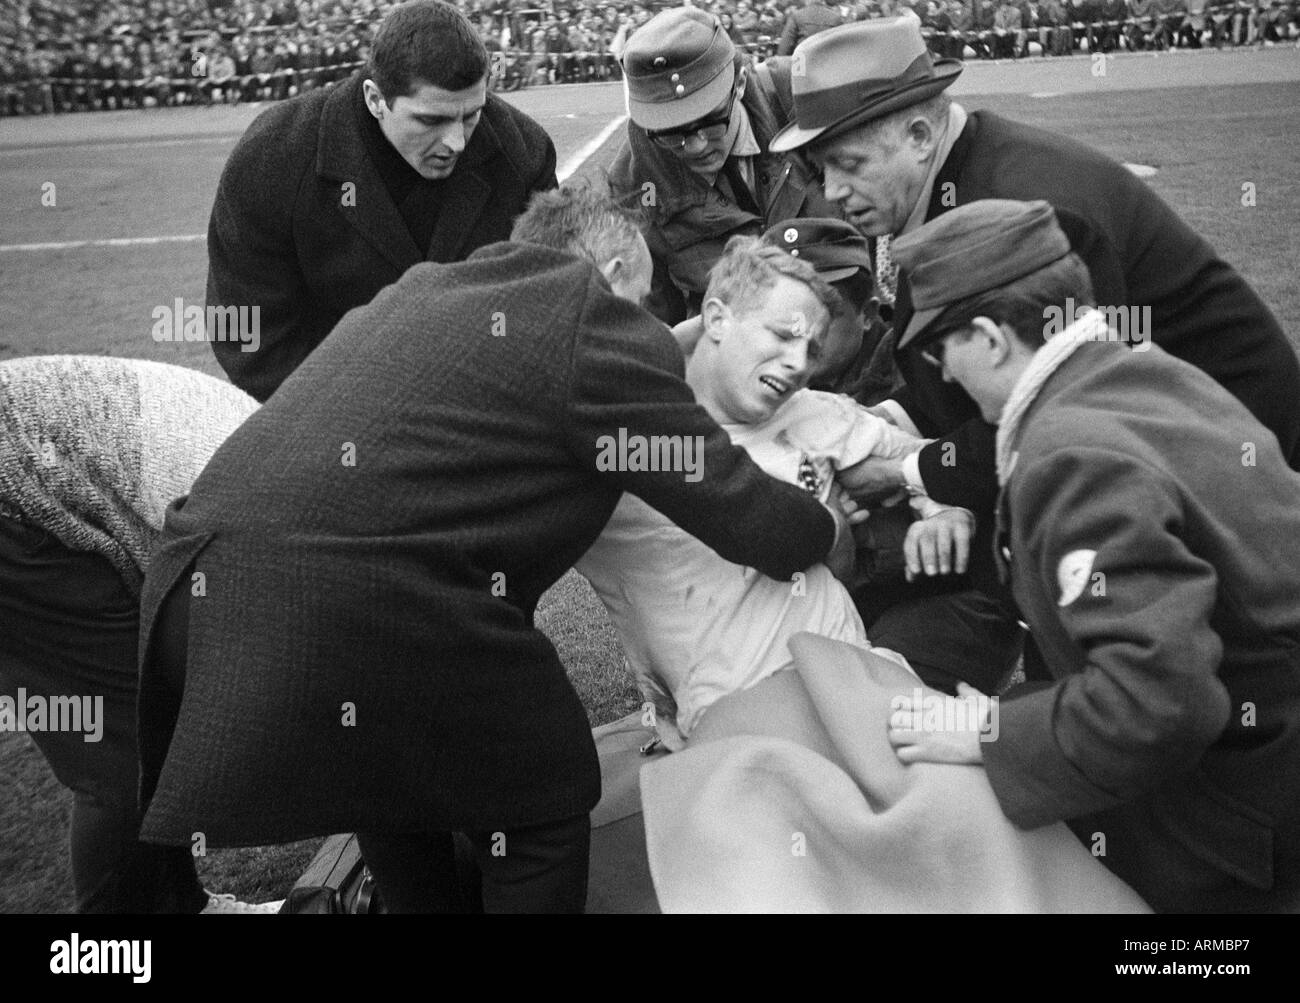 football, Bundesliga, 1966/1967, Rhine Stadium Duesseldorf, Fortuna Duesseldorf versus Borussia Moenchengladbach 2:2, injured football player, Berti Vogts (MG) lies on a stretcher and is  in pain, the helpers are f.l.t.r. masseur Charly Stock (covered), a Stock Photo